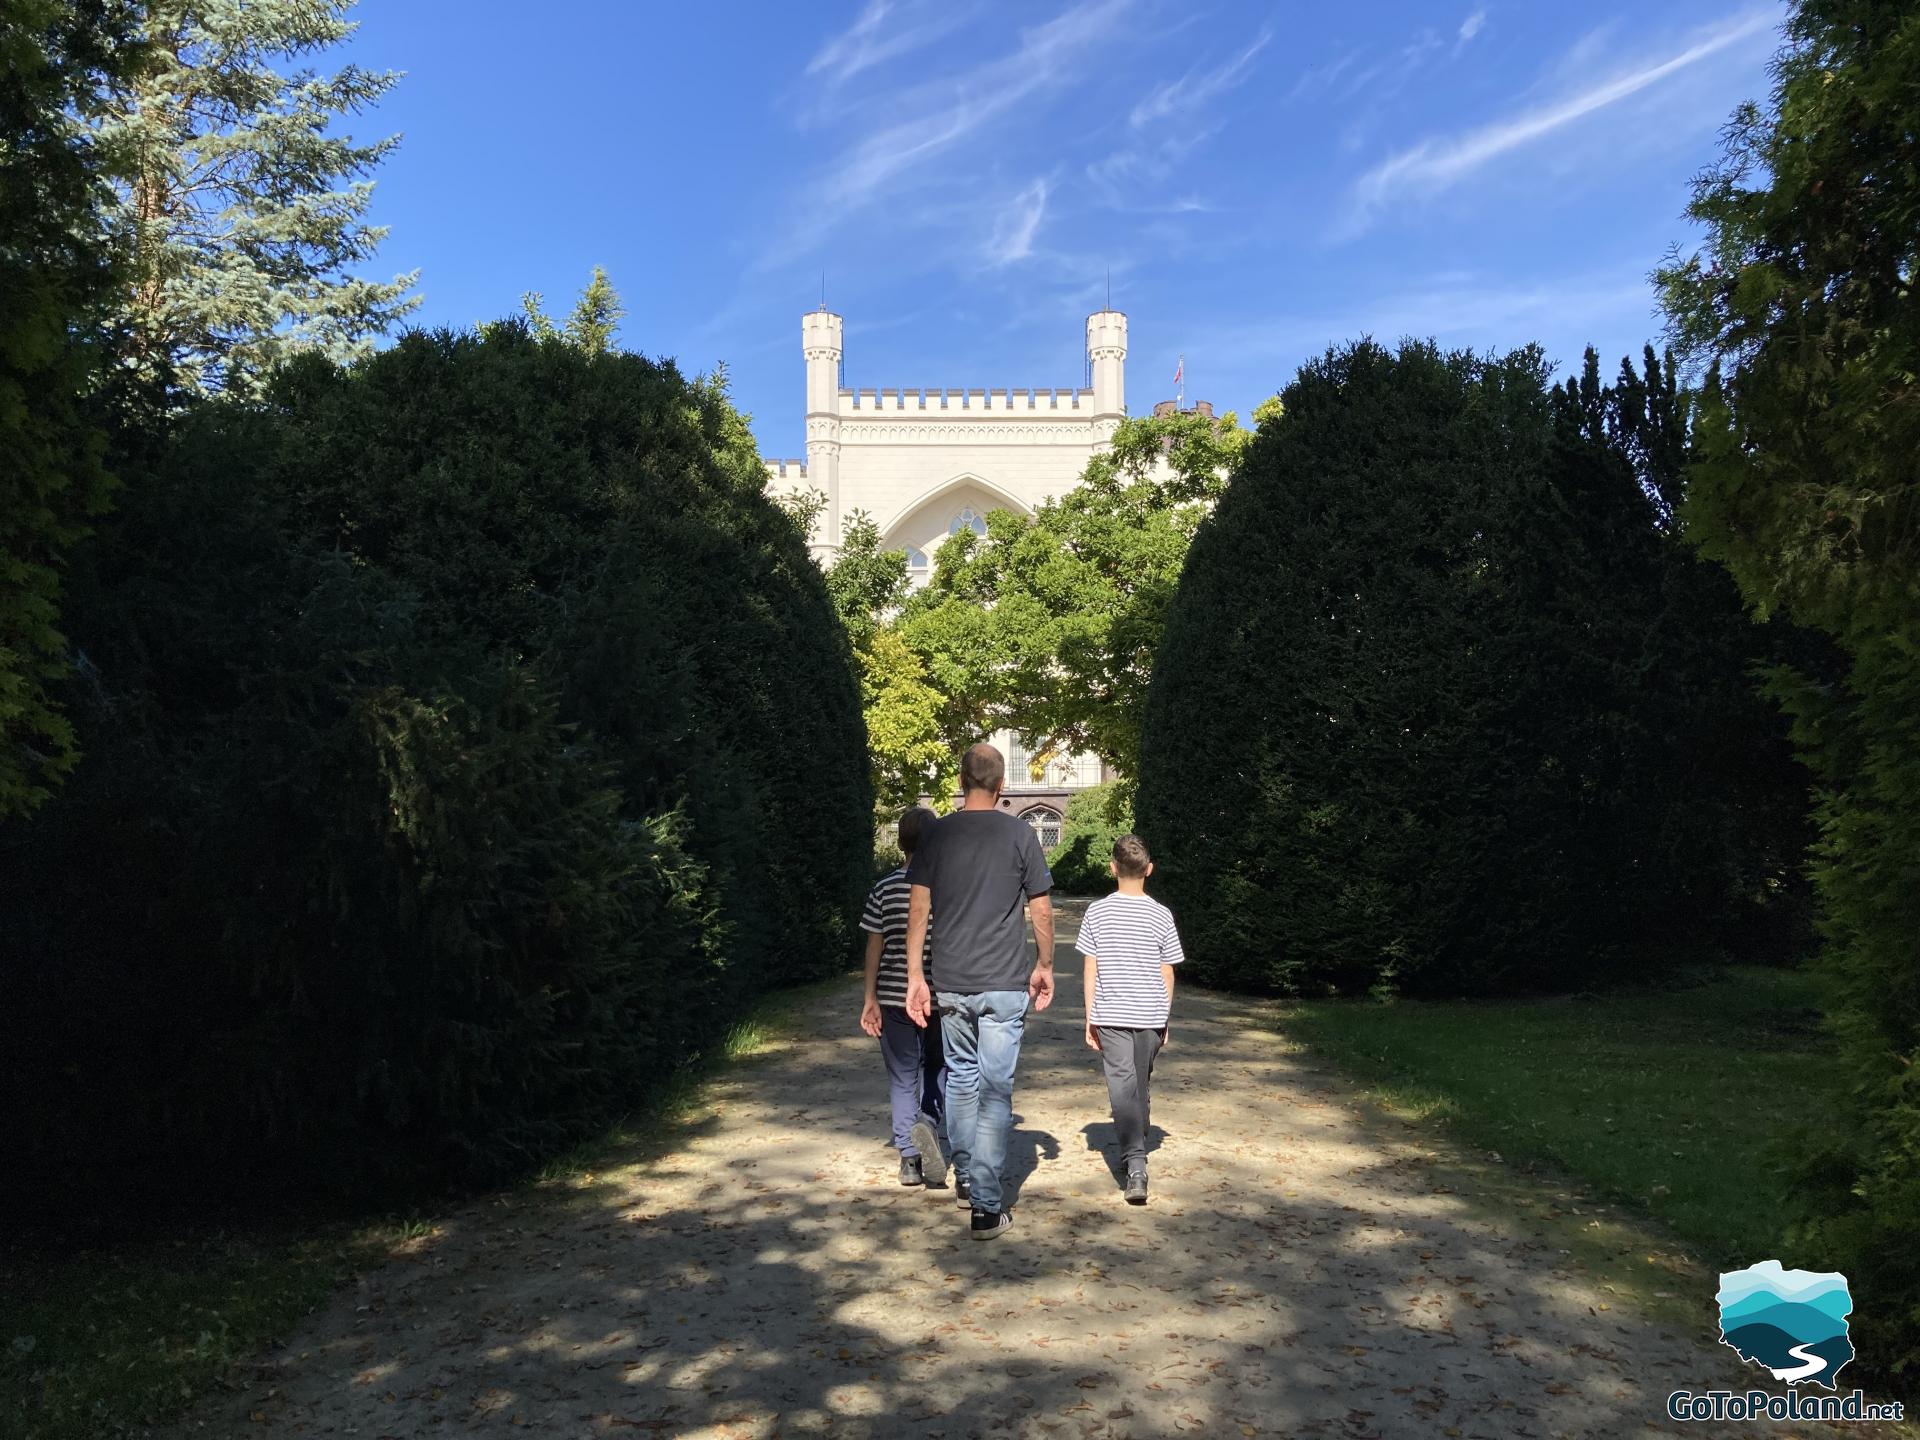 a man and two boys heading to the castle, the path is surrounded by green bushes